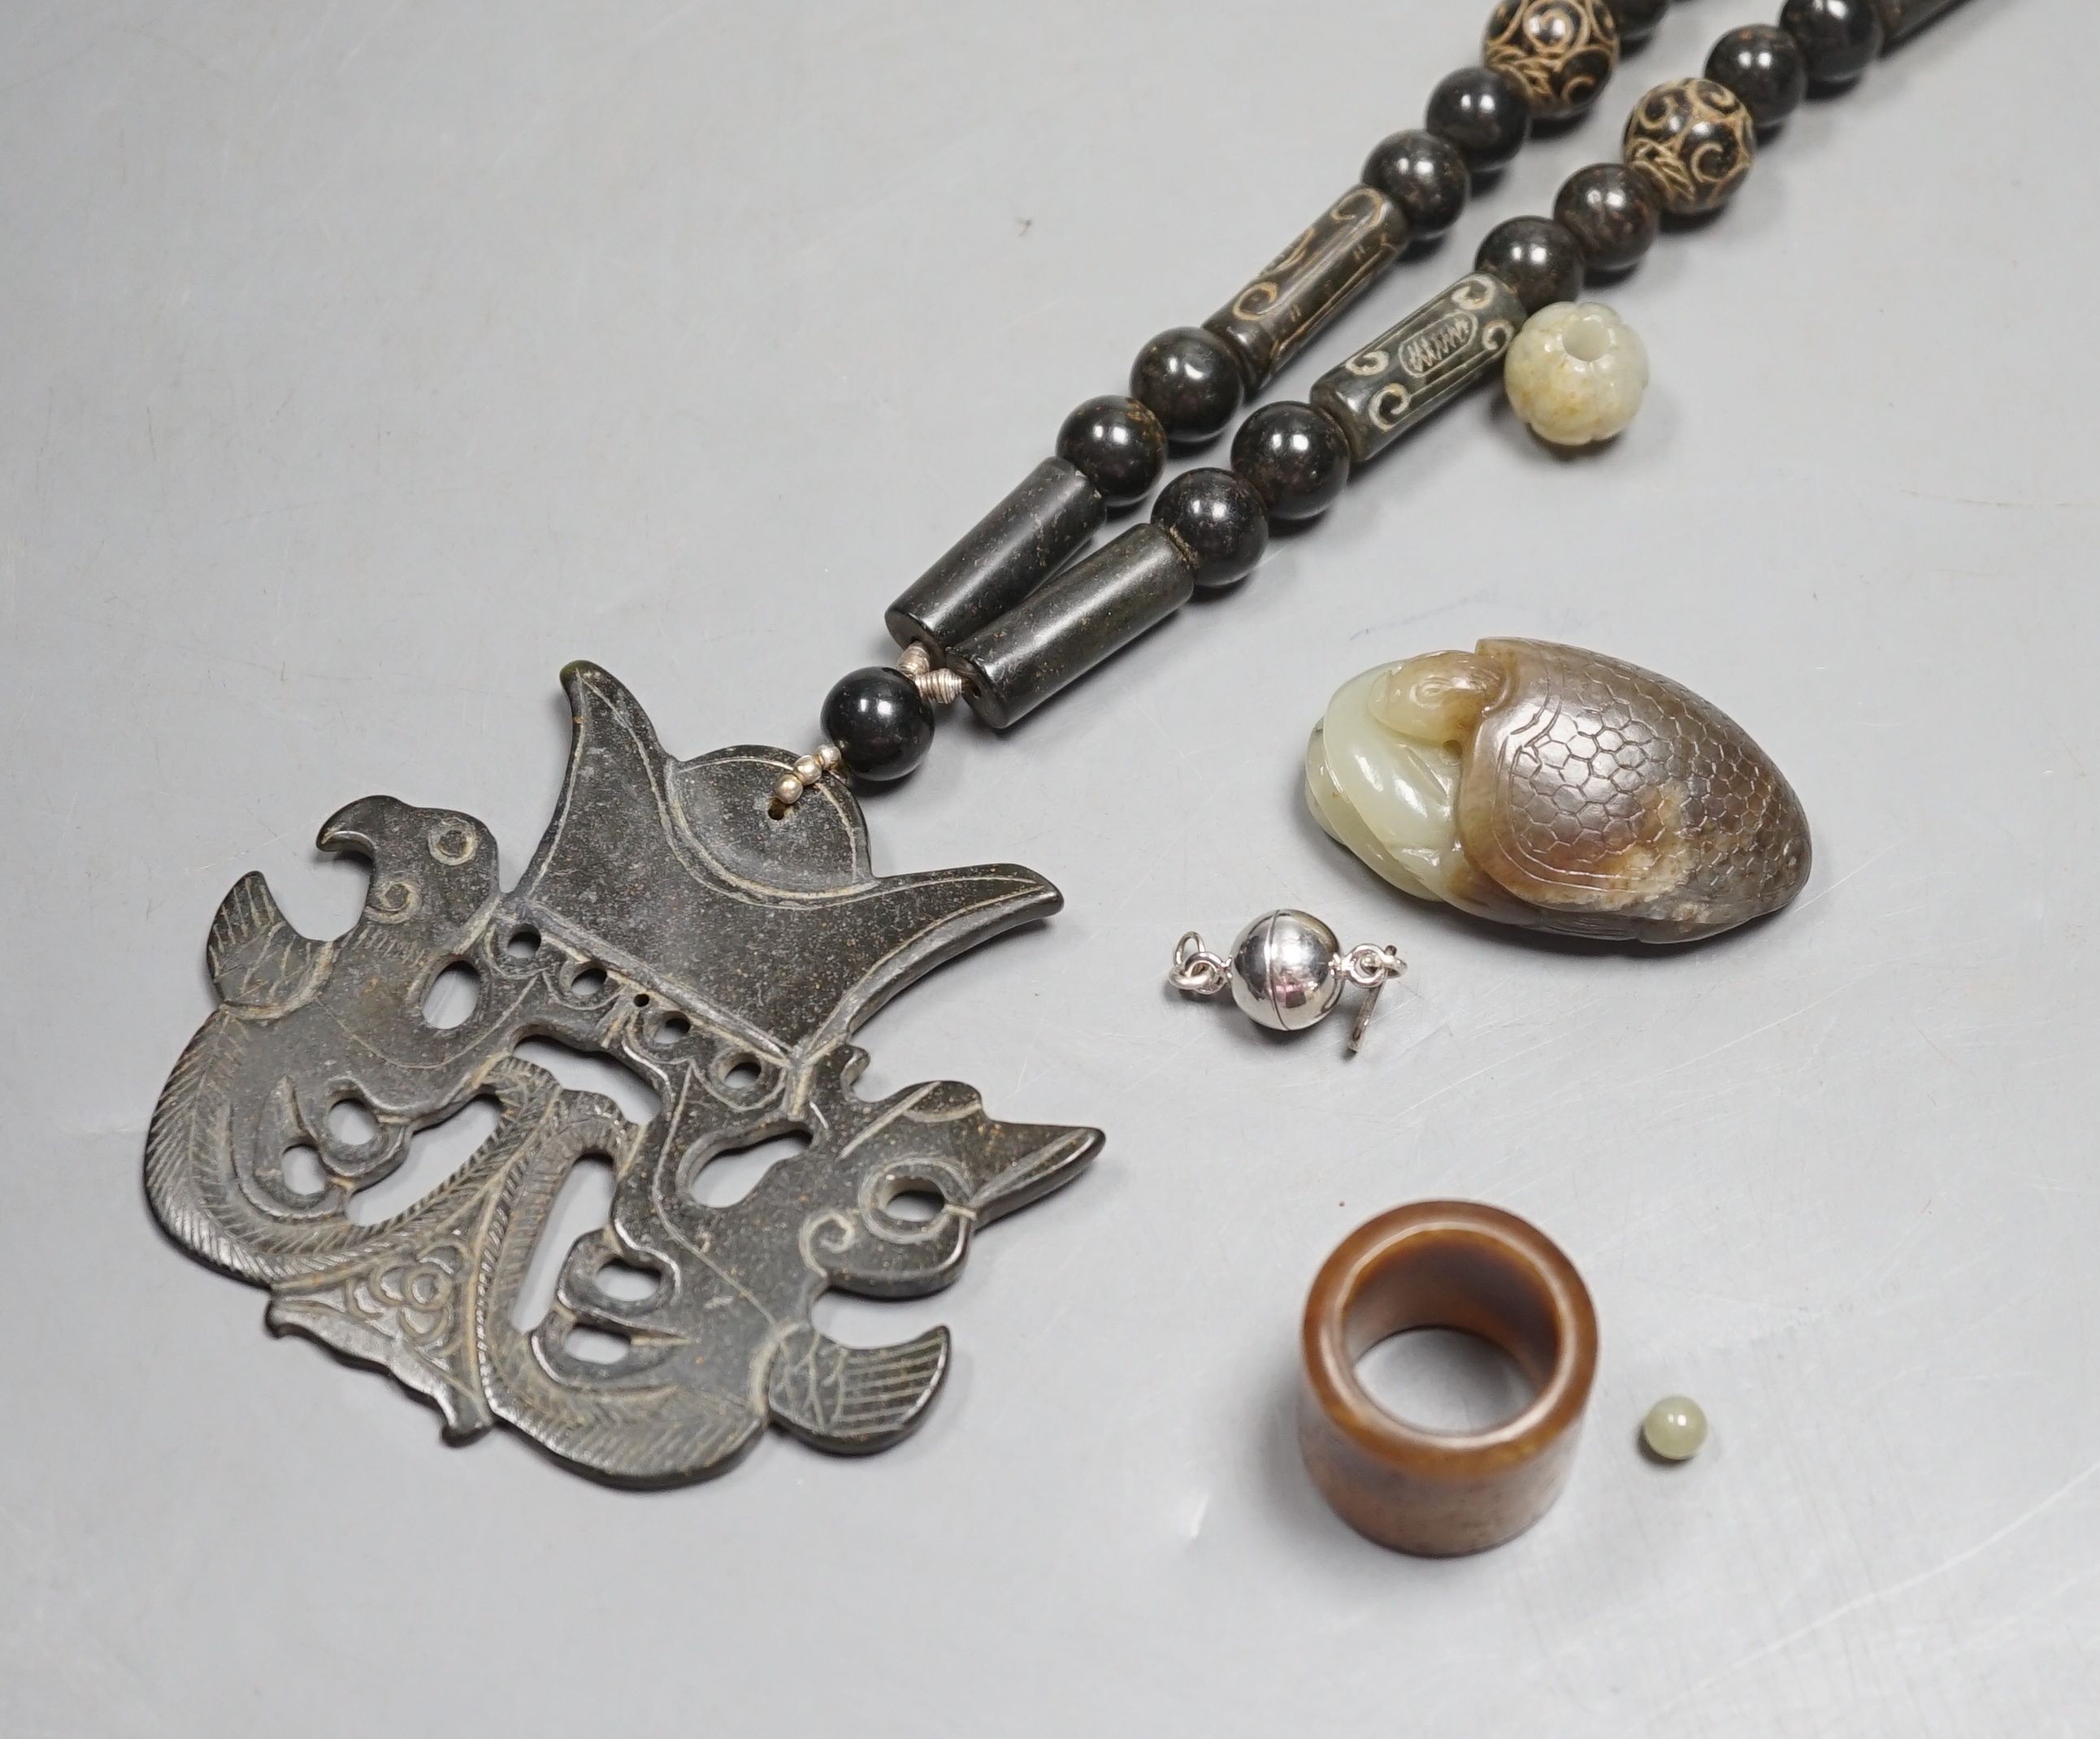 Kai Yin Lo of Hong Kong, a jade turtle and snake pendant, archer’s ring and two beads, formerly strung on a necklace together with a hardstone necklace